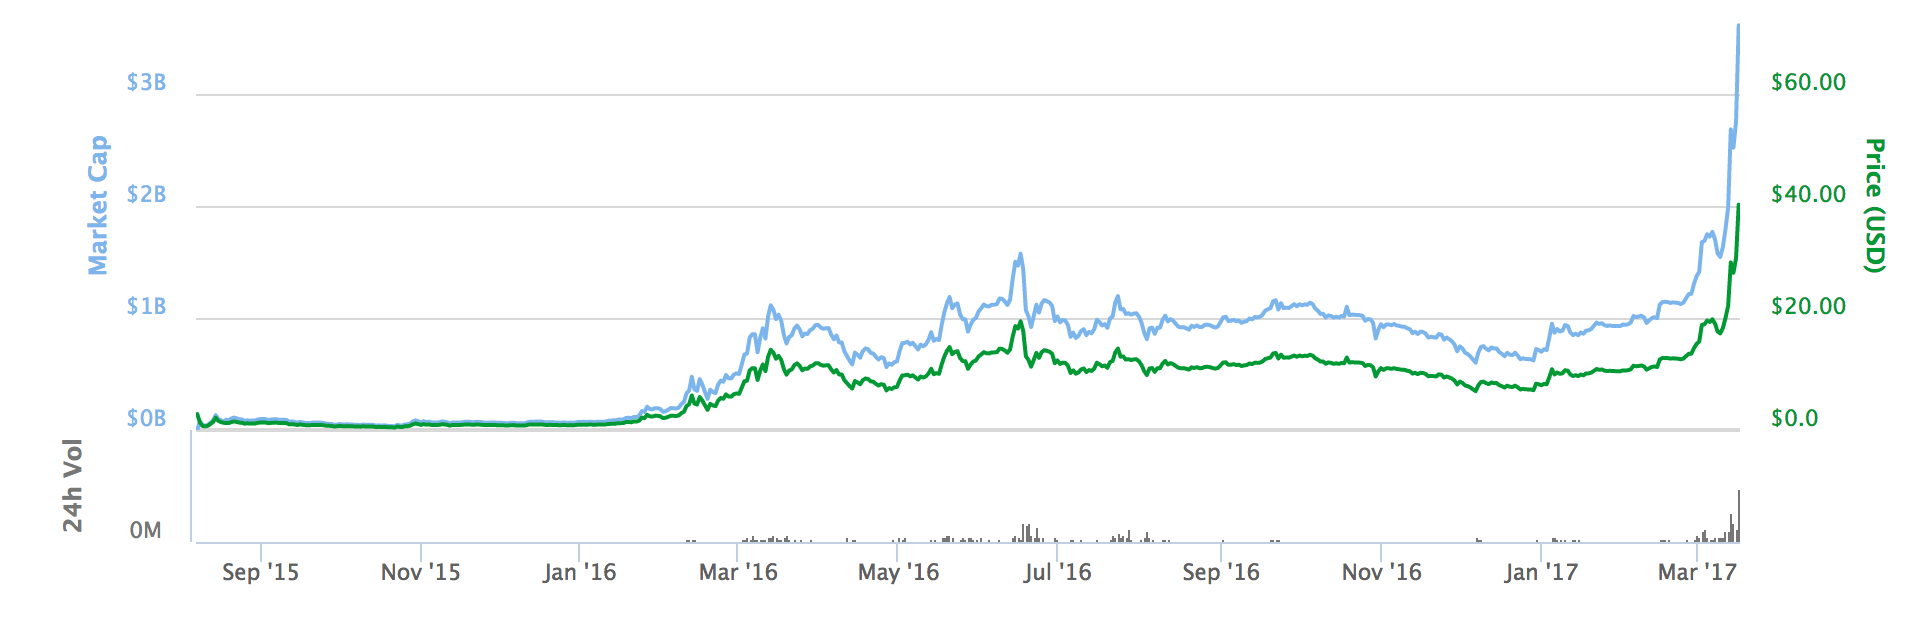 Ethereum Price Tear Continues With New All-Time High